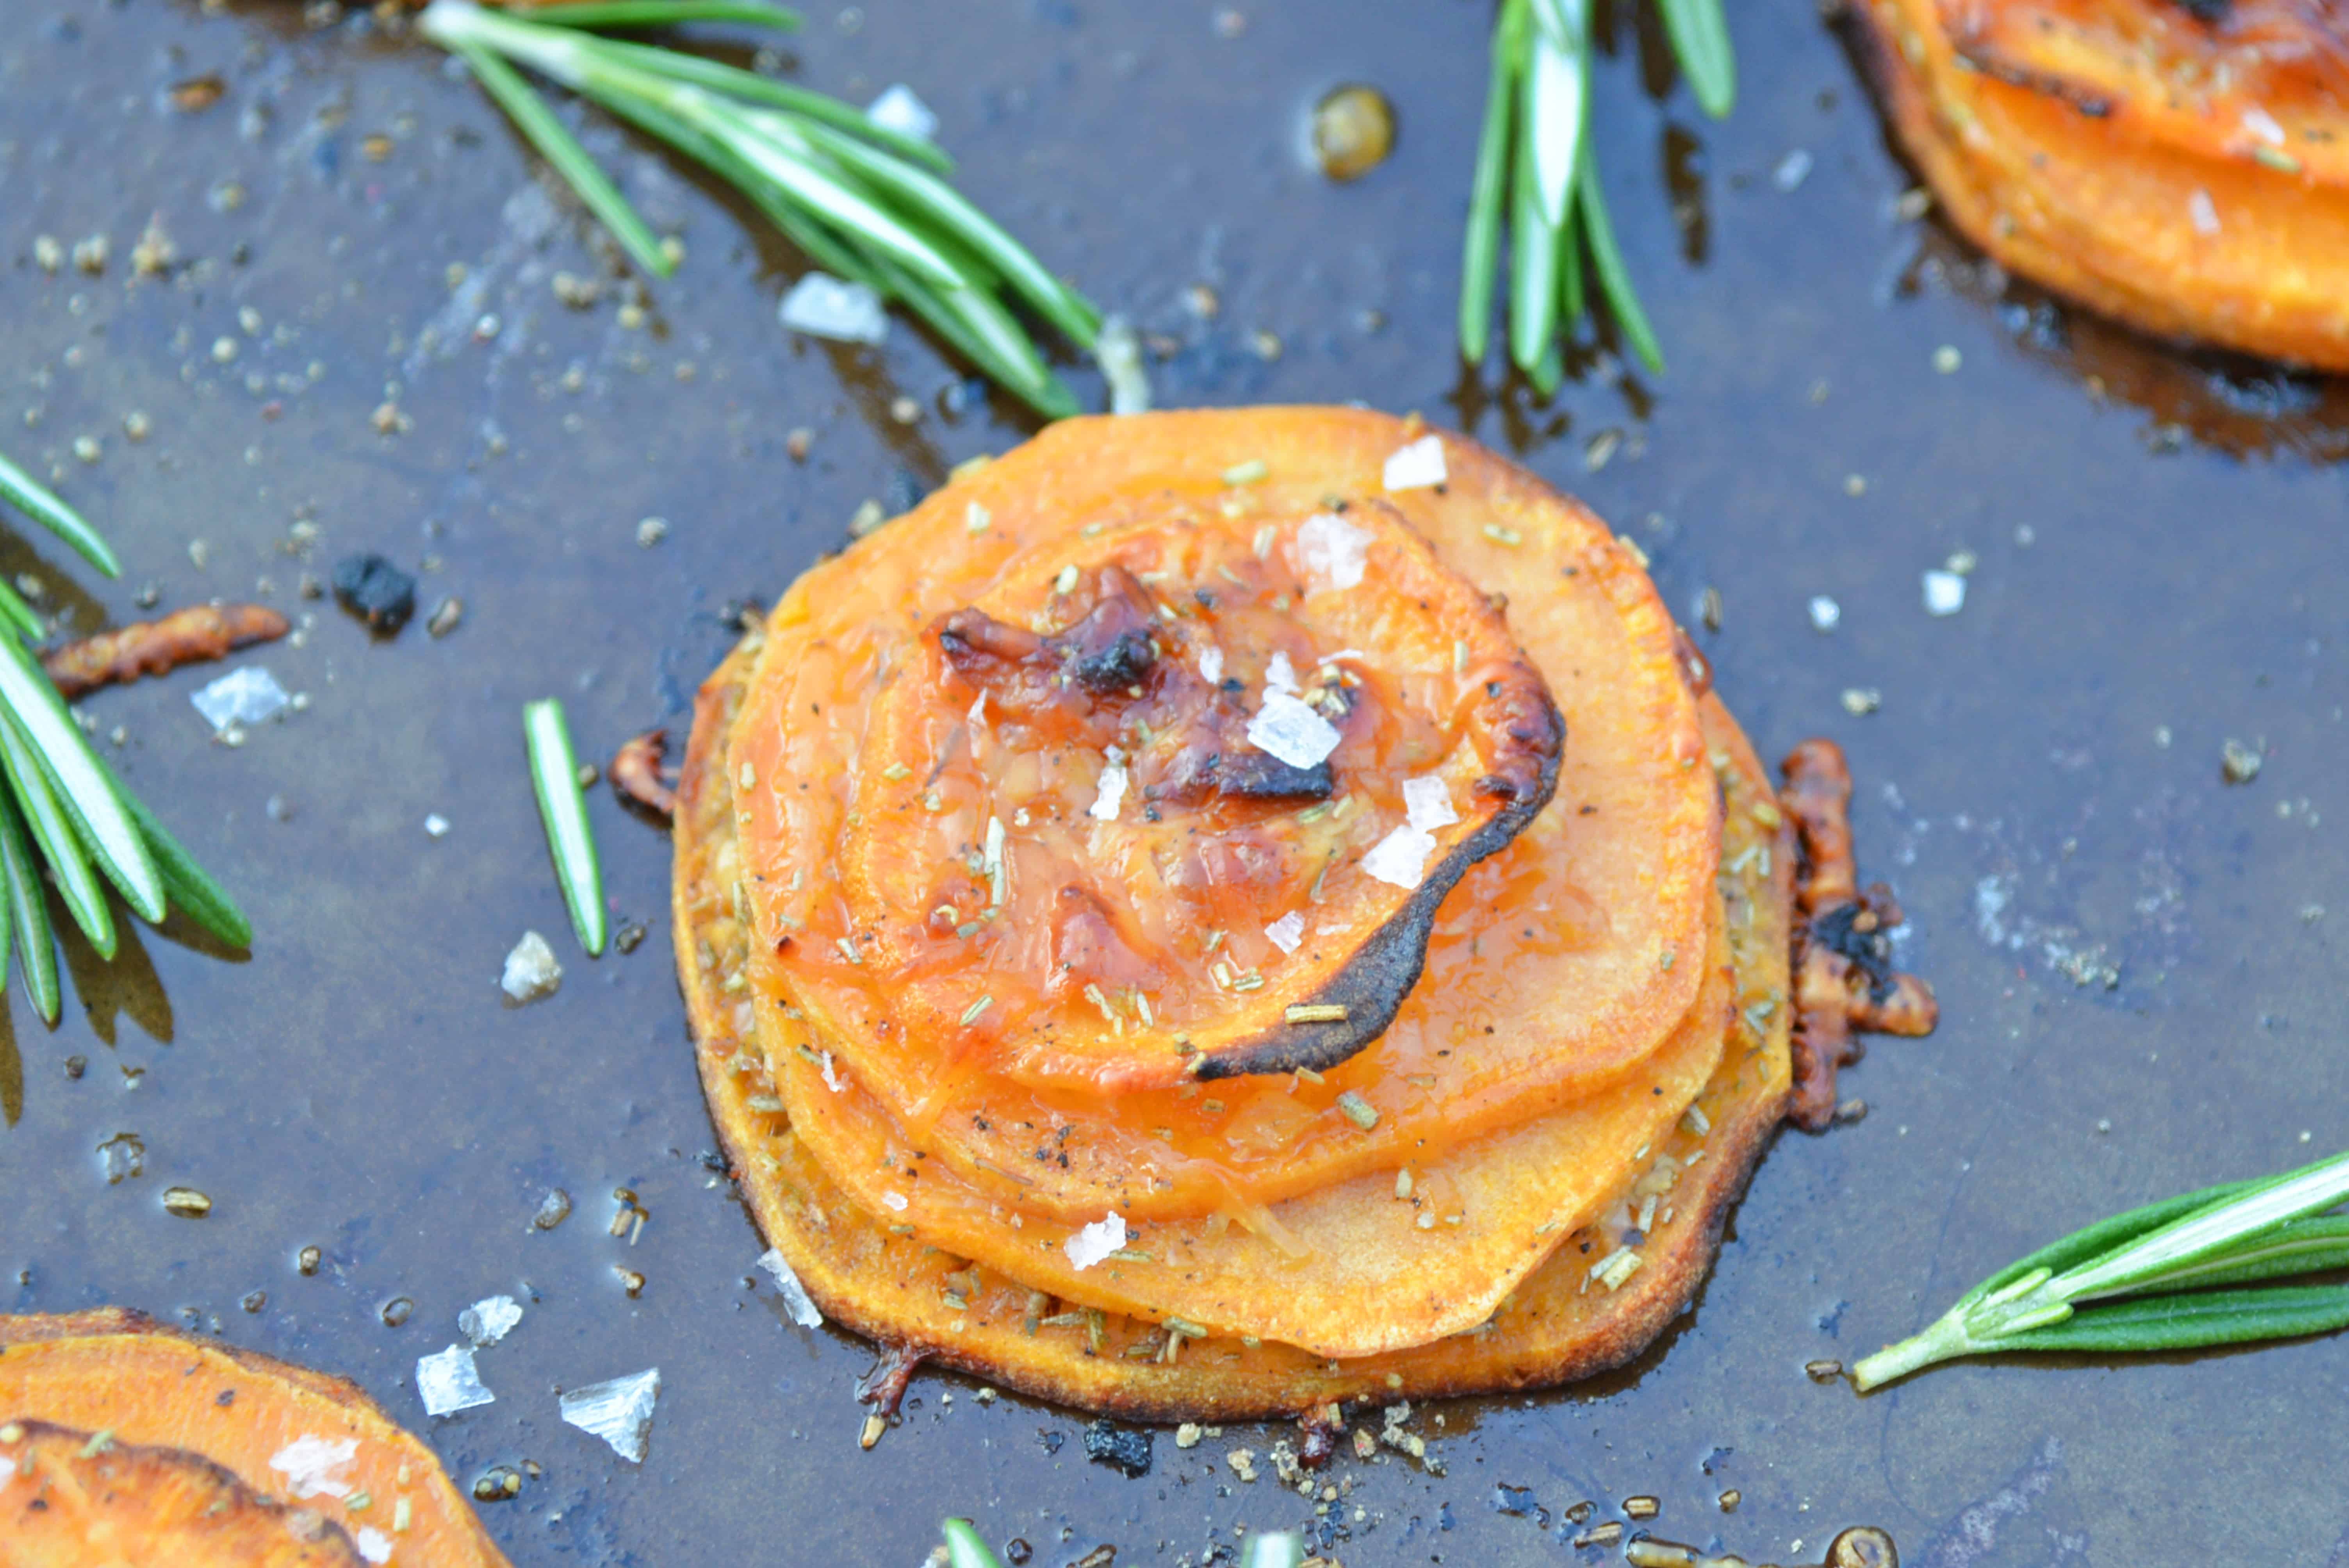 Rosemary Sweet Potato Stacks are a simple and visually appealing side dish or appetizer fit for any occasion. #sweetpotatostacks #sweetpotatoes www.savoryexperiments.com